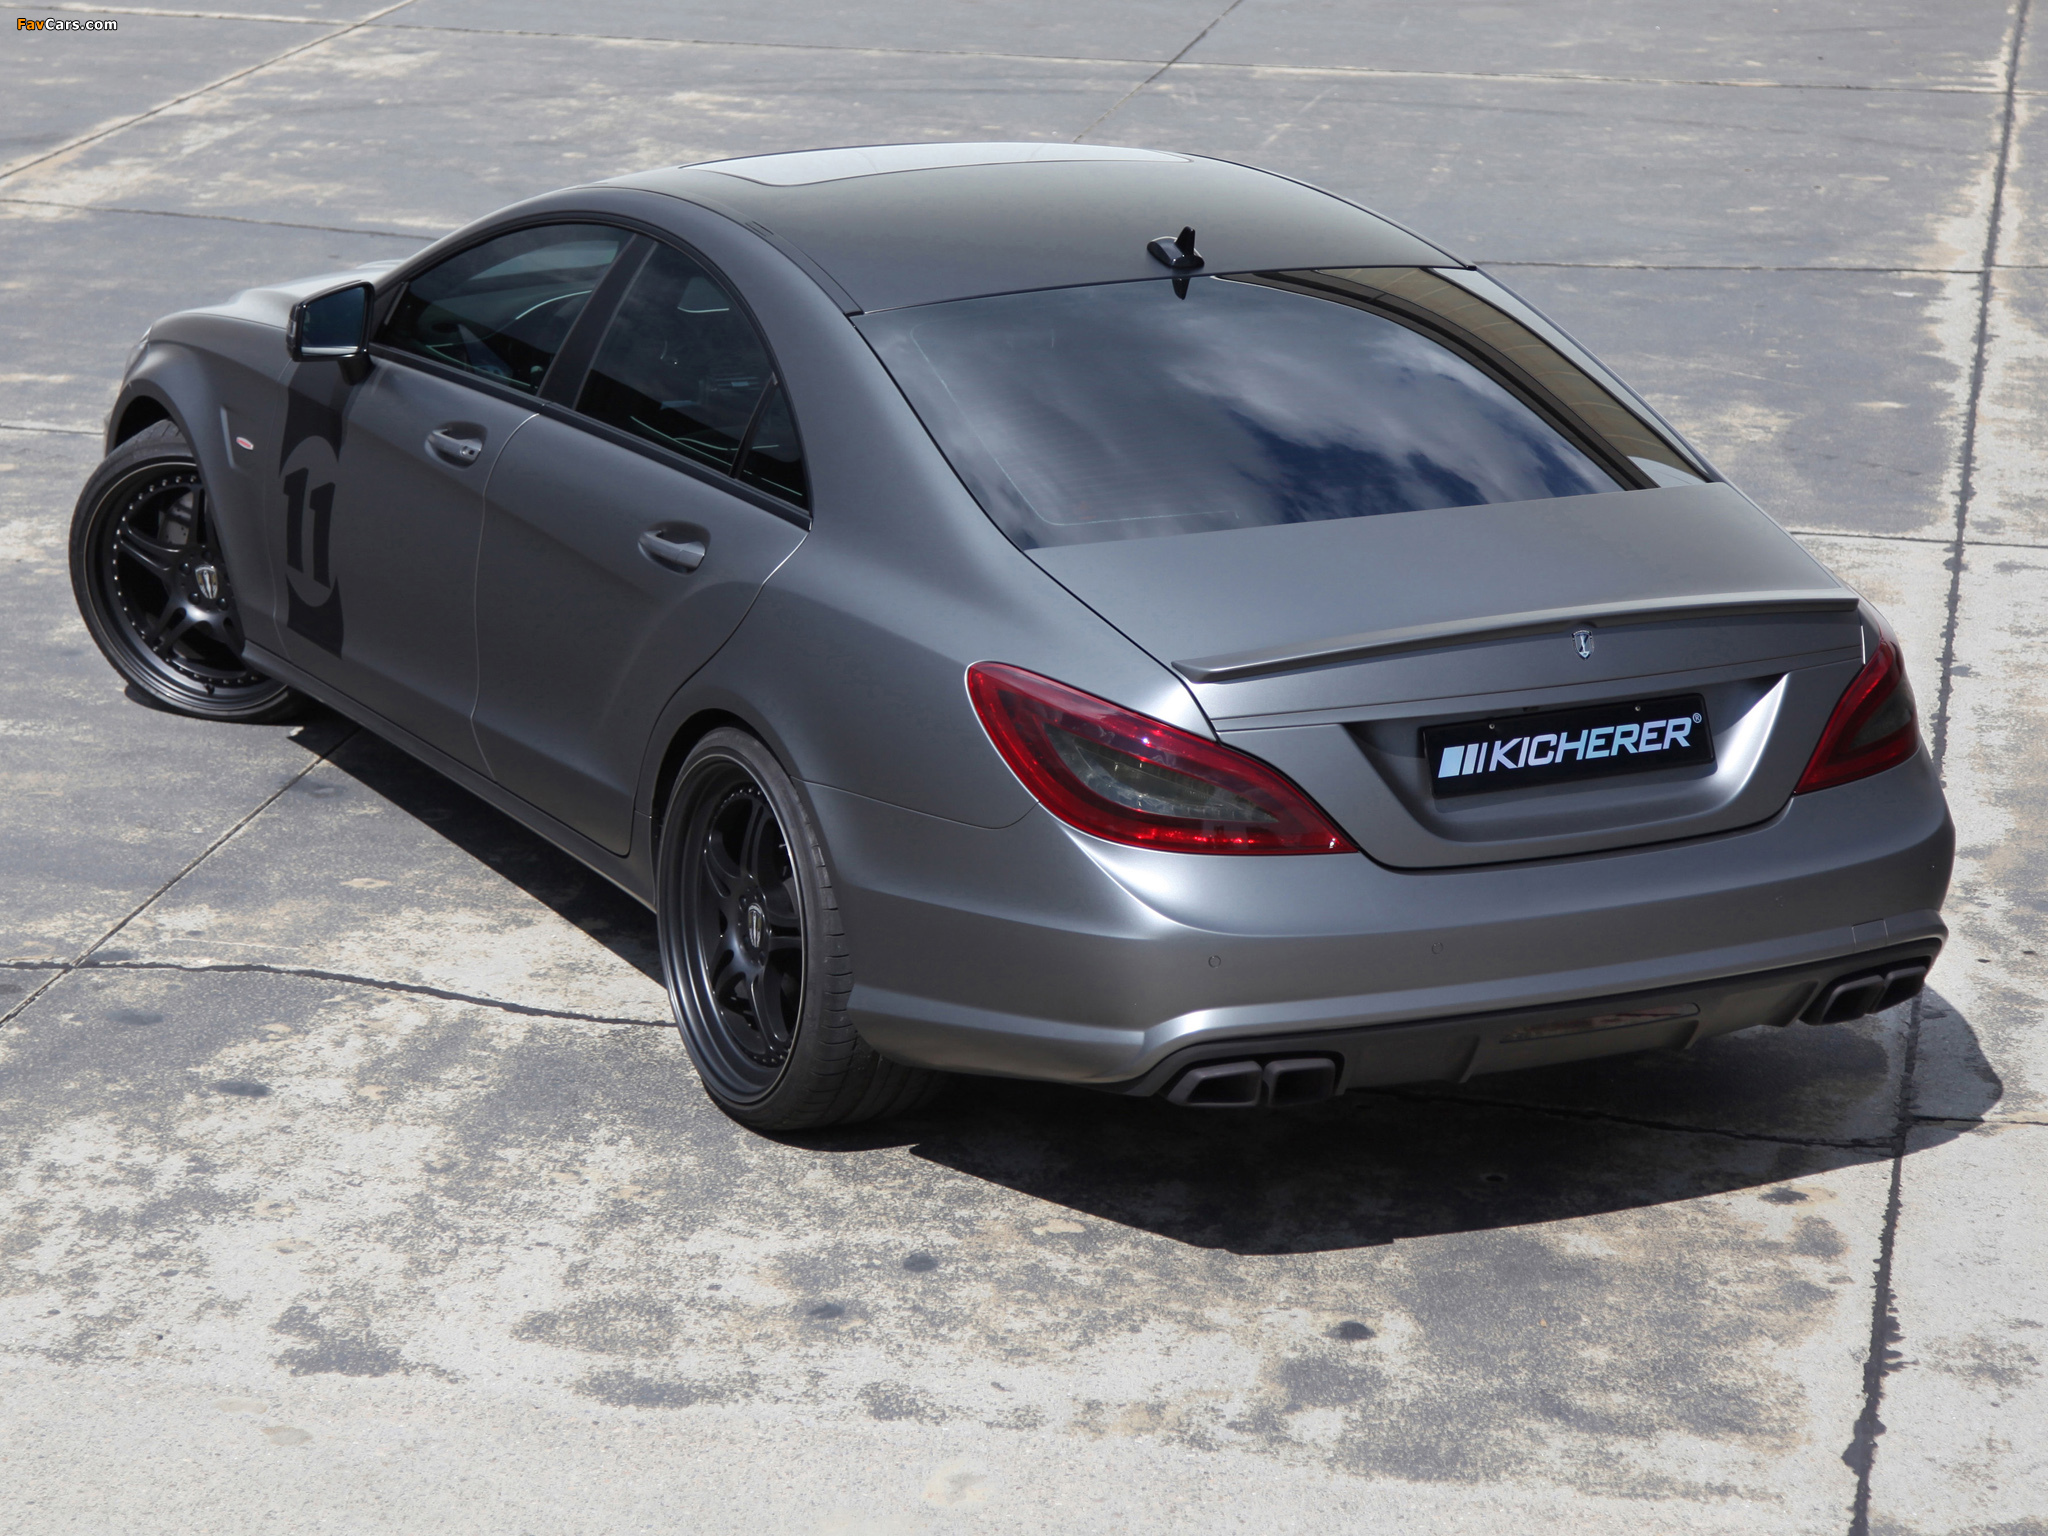 Kicherer Mercedes-Benz CLS 63 AMG Yachting (C218) 2012 images (2048 x 1536)